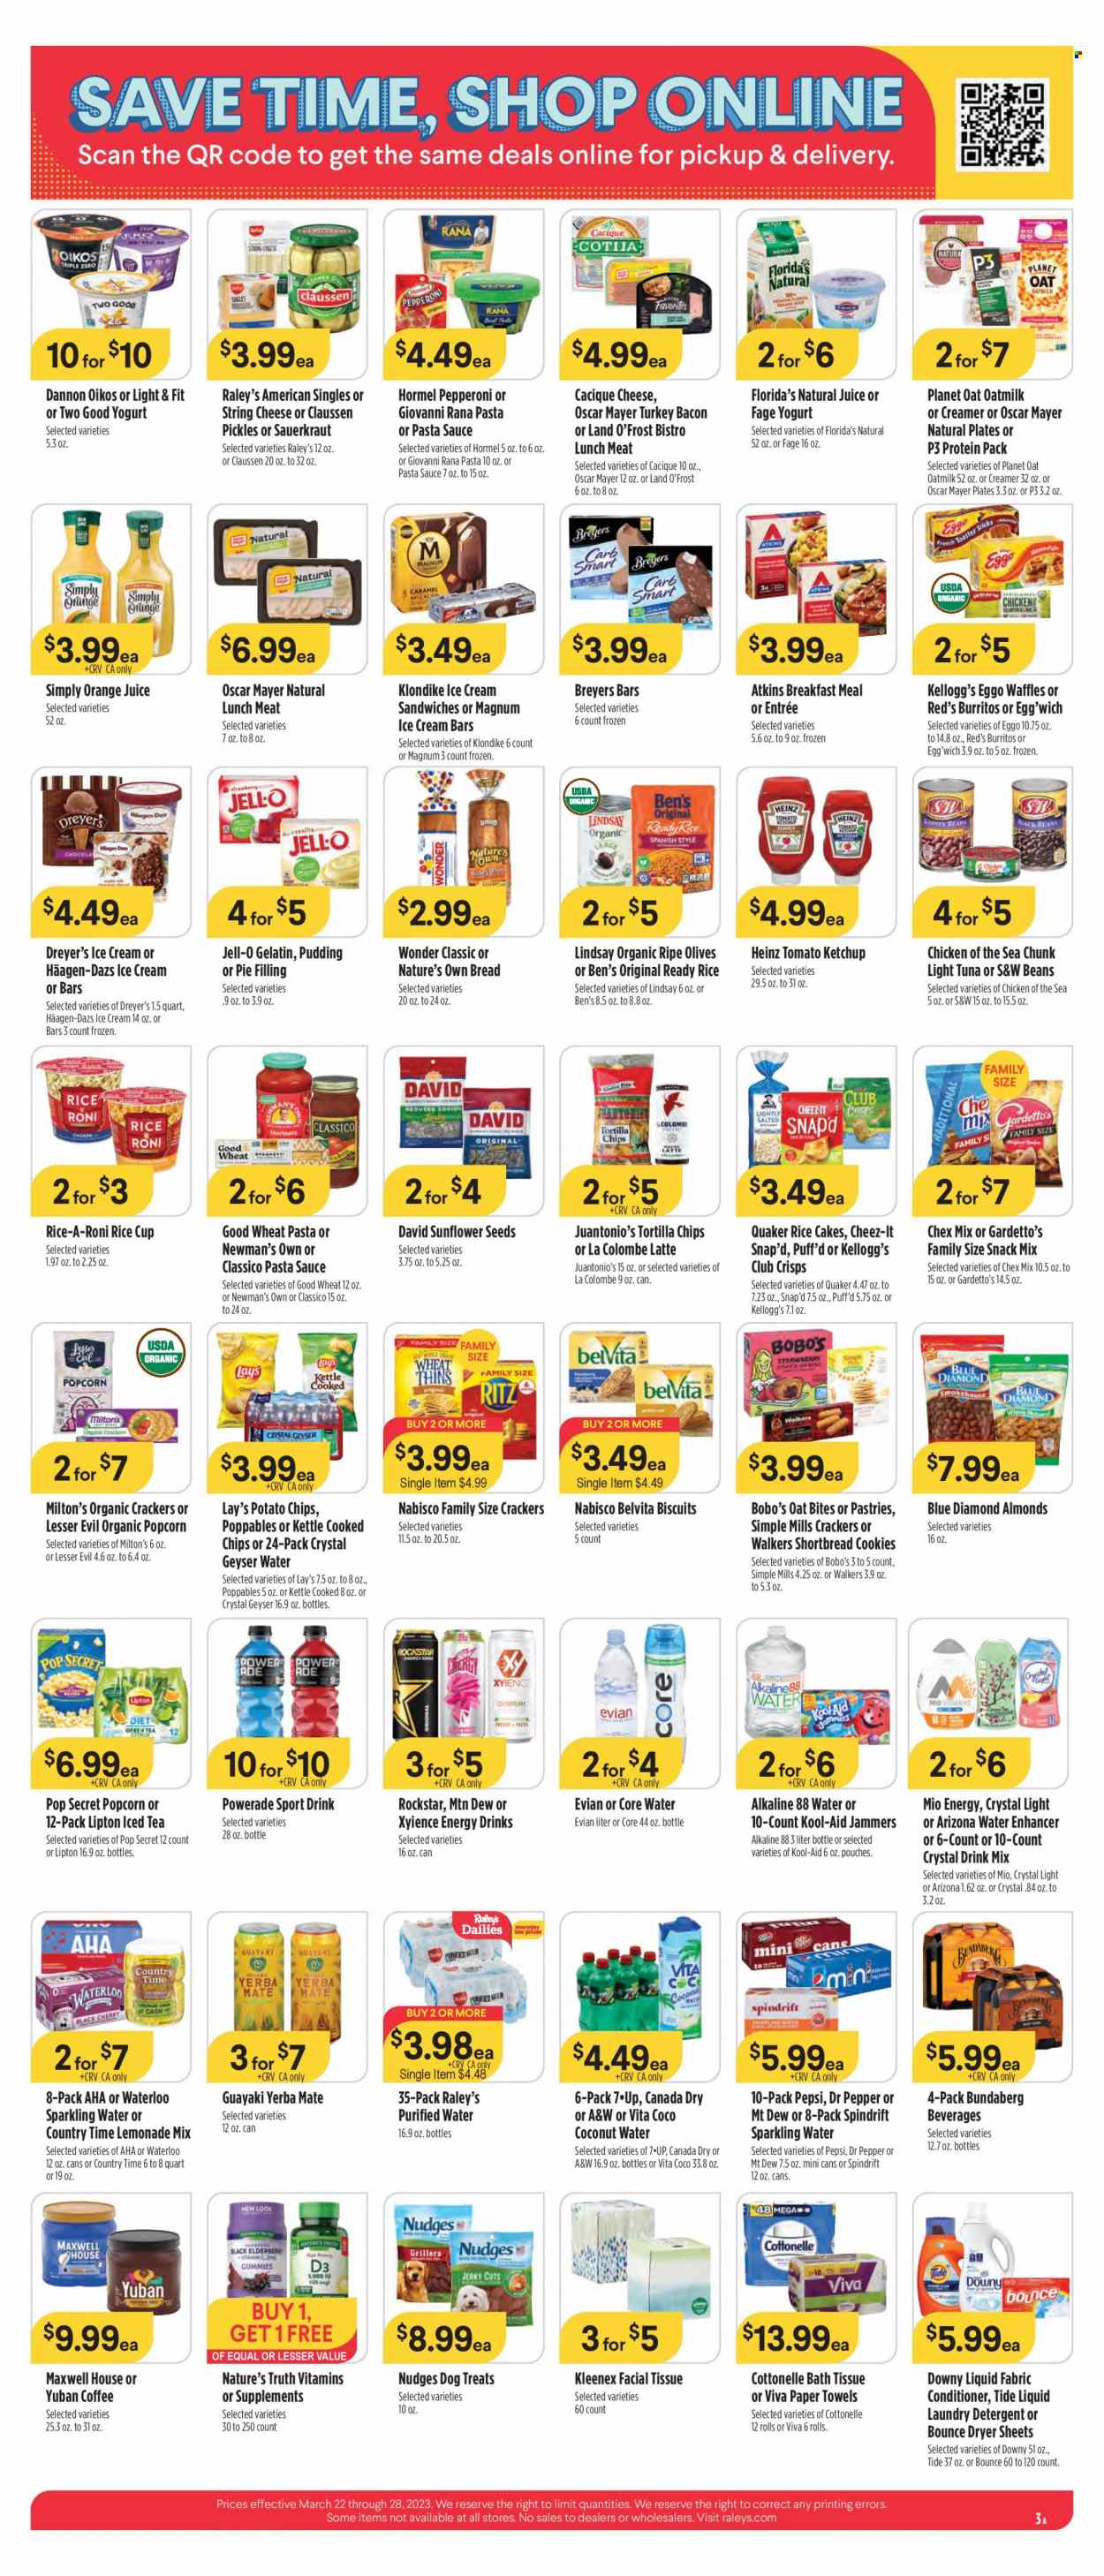 thumbnail - Raley's Flyer - 03/22/2023 - 03/28/2023 - Sales products - bread, waffles, cherries, tuna, pasta sauce, sandwich, sauce, burrito, Quaker, Giovanni Rana, Rana, Hormel, bacon, turkey bacon, jerky, Oscar Mayer, pepperoni, lunch meat, string cheese, pudding, yoghurt, Oikos, Dannon, oat milk, creamer, Magnum, ice cream, ice cream bars, ice cream sandwich, Häagen-Dazs, cookies, snack, crackers, Kellogg's, biscuit, Florida's Natural, RITZ, tortilla chips, potato chips, Lay’s, Thins, popcorn, Cheez-It, Chex Mix, pie filling, Jell-O, black beans, sauerkraut, Heinz, kidney beans, pickles, olives, light tuna, Chicken of the Sea, belVita, oat bites, ketchup, pesto, Classico, honey, almonds, sunflower seeds, Blue Diamond, Canada Dry, lemonade, Mountain Dew, Powerade, Pepsi, orange juice, juice, energy drink, Lipton, ice tea, Dr. Pepper, coconut water, 7UP, AriZona, A&W, Country Time, Spindrift, Rockstar, sparkling water, purified water, Evian, water, Bundaberg, green tea, Maxwell House, bath tissue, Cottonelle, Kleenex, kitchen towels, paper towels, detergent, Tide, laundry detergent, Bounce, dryer sheets, Downy Laundry, Nature's Truth, vitamin c, gelatin, zinc, Nature's Own, vitamin D3. Page 3.